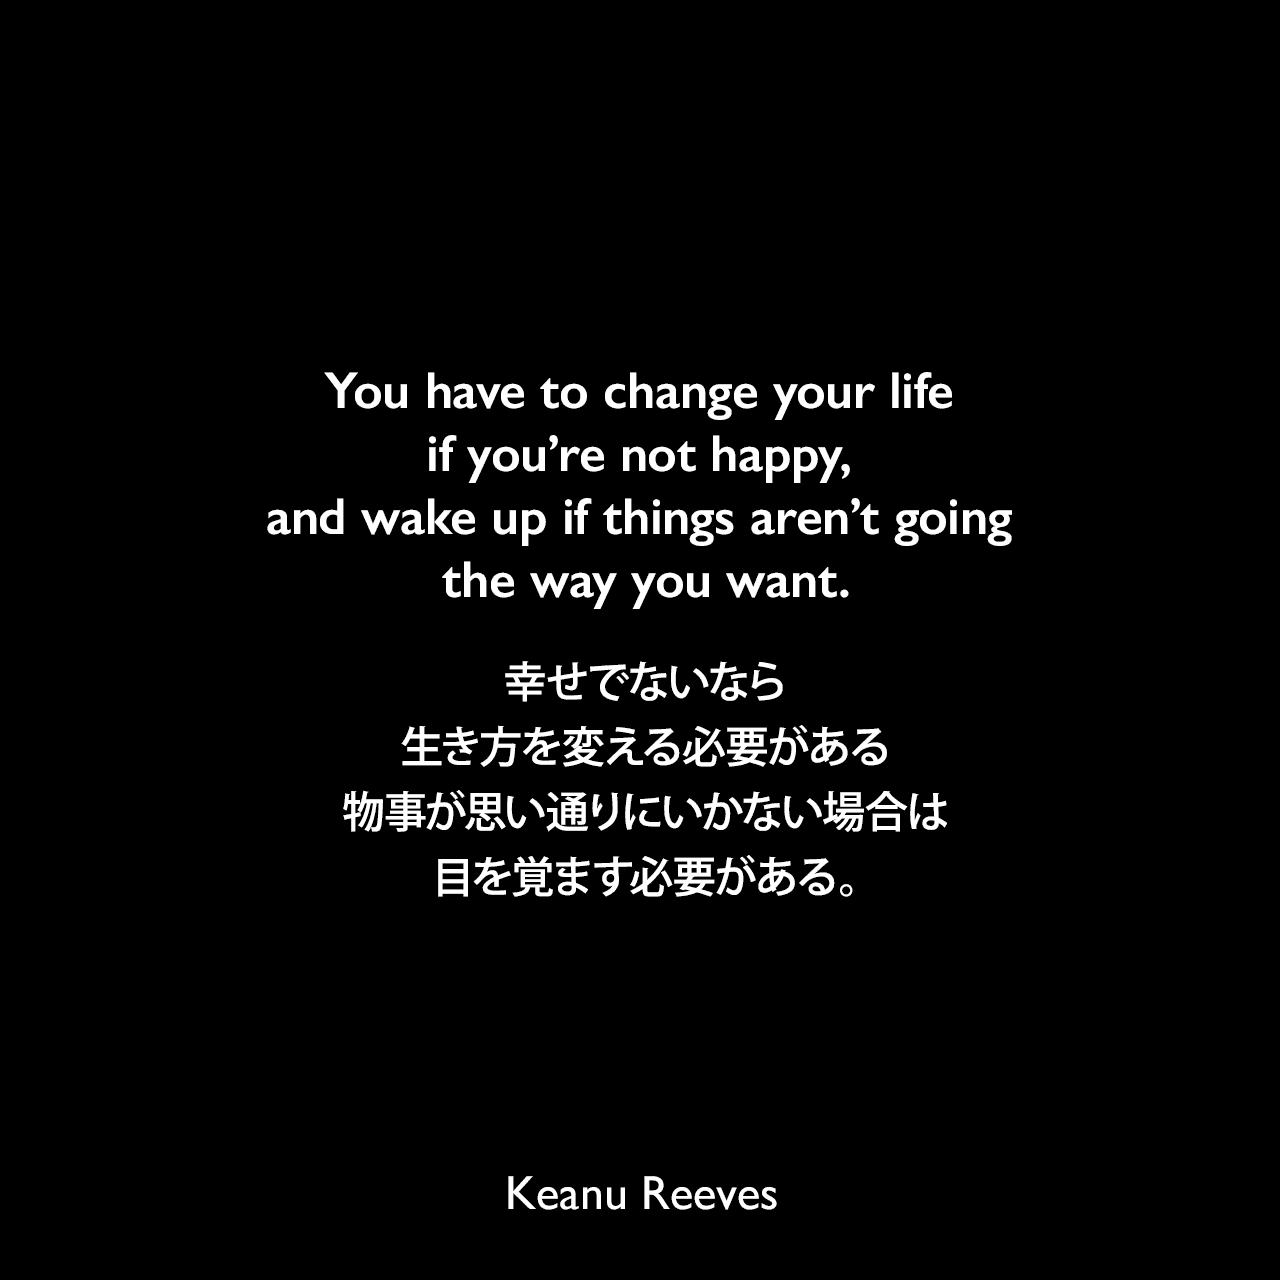 You have to change your life if you’re not happy, and wake up if things aren’t going the way you want.幸せでないなら生き方を変える必要がある、物事が思い通りにいかない場合は目を覚ます必要がある。Keanu Reeves